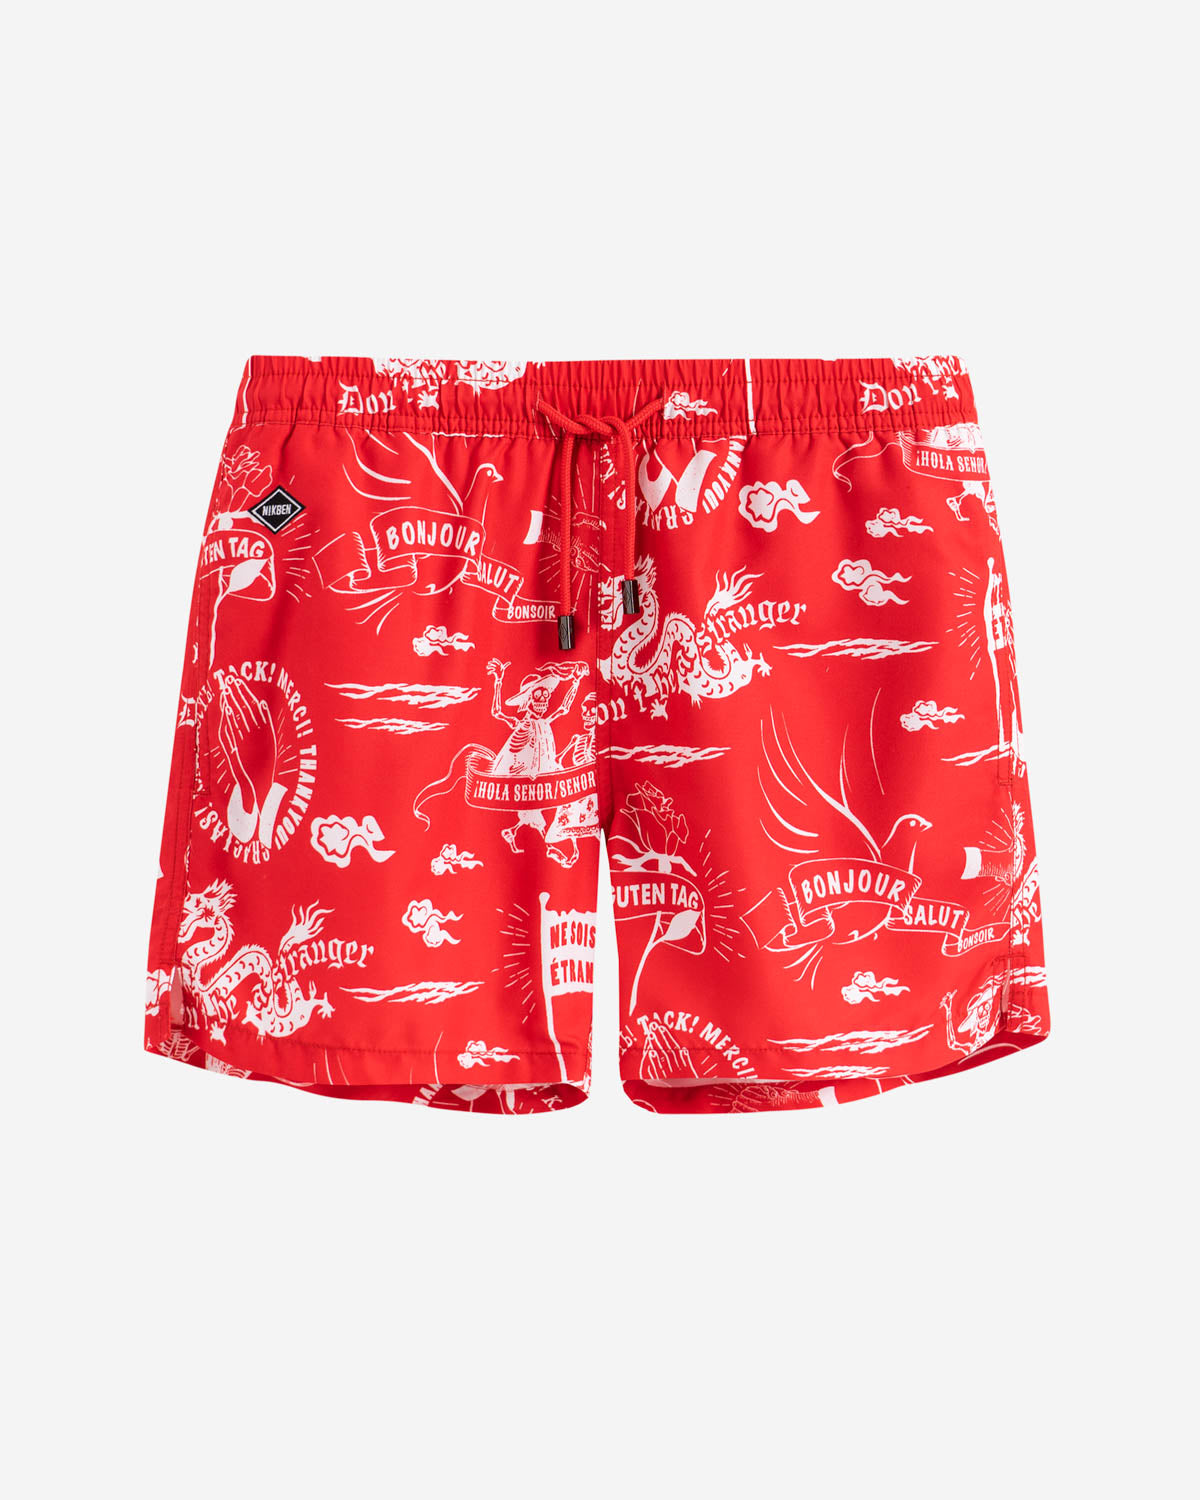 Red mid length swim trunks with white print